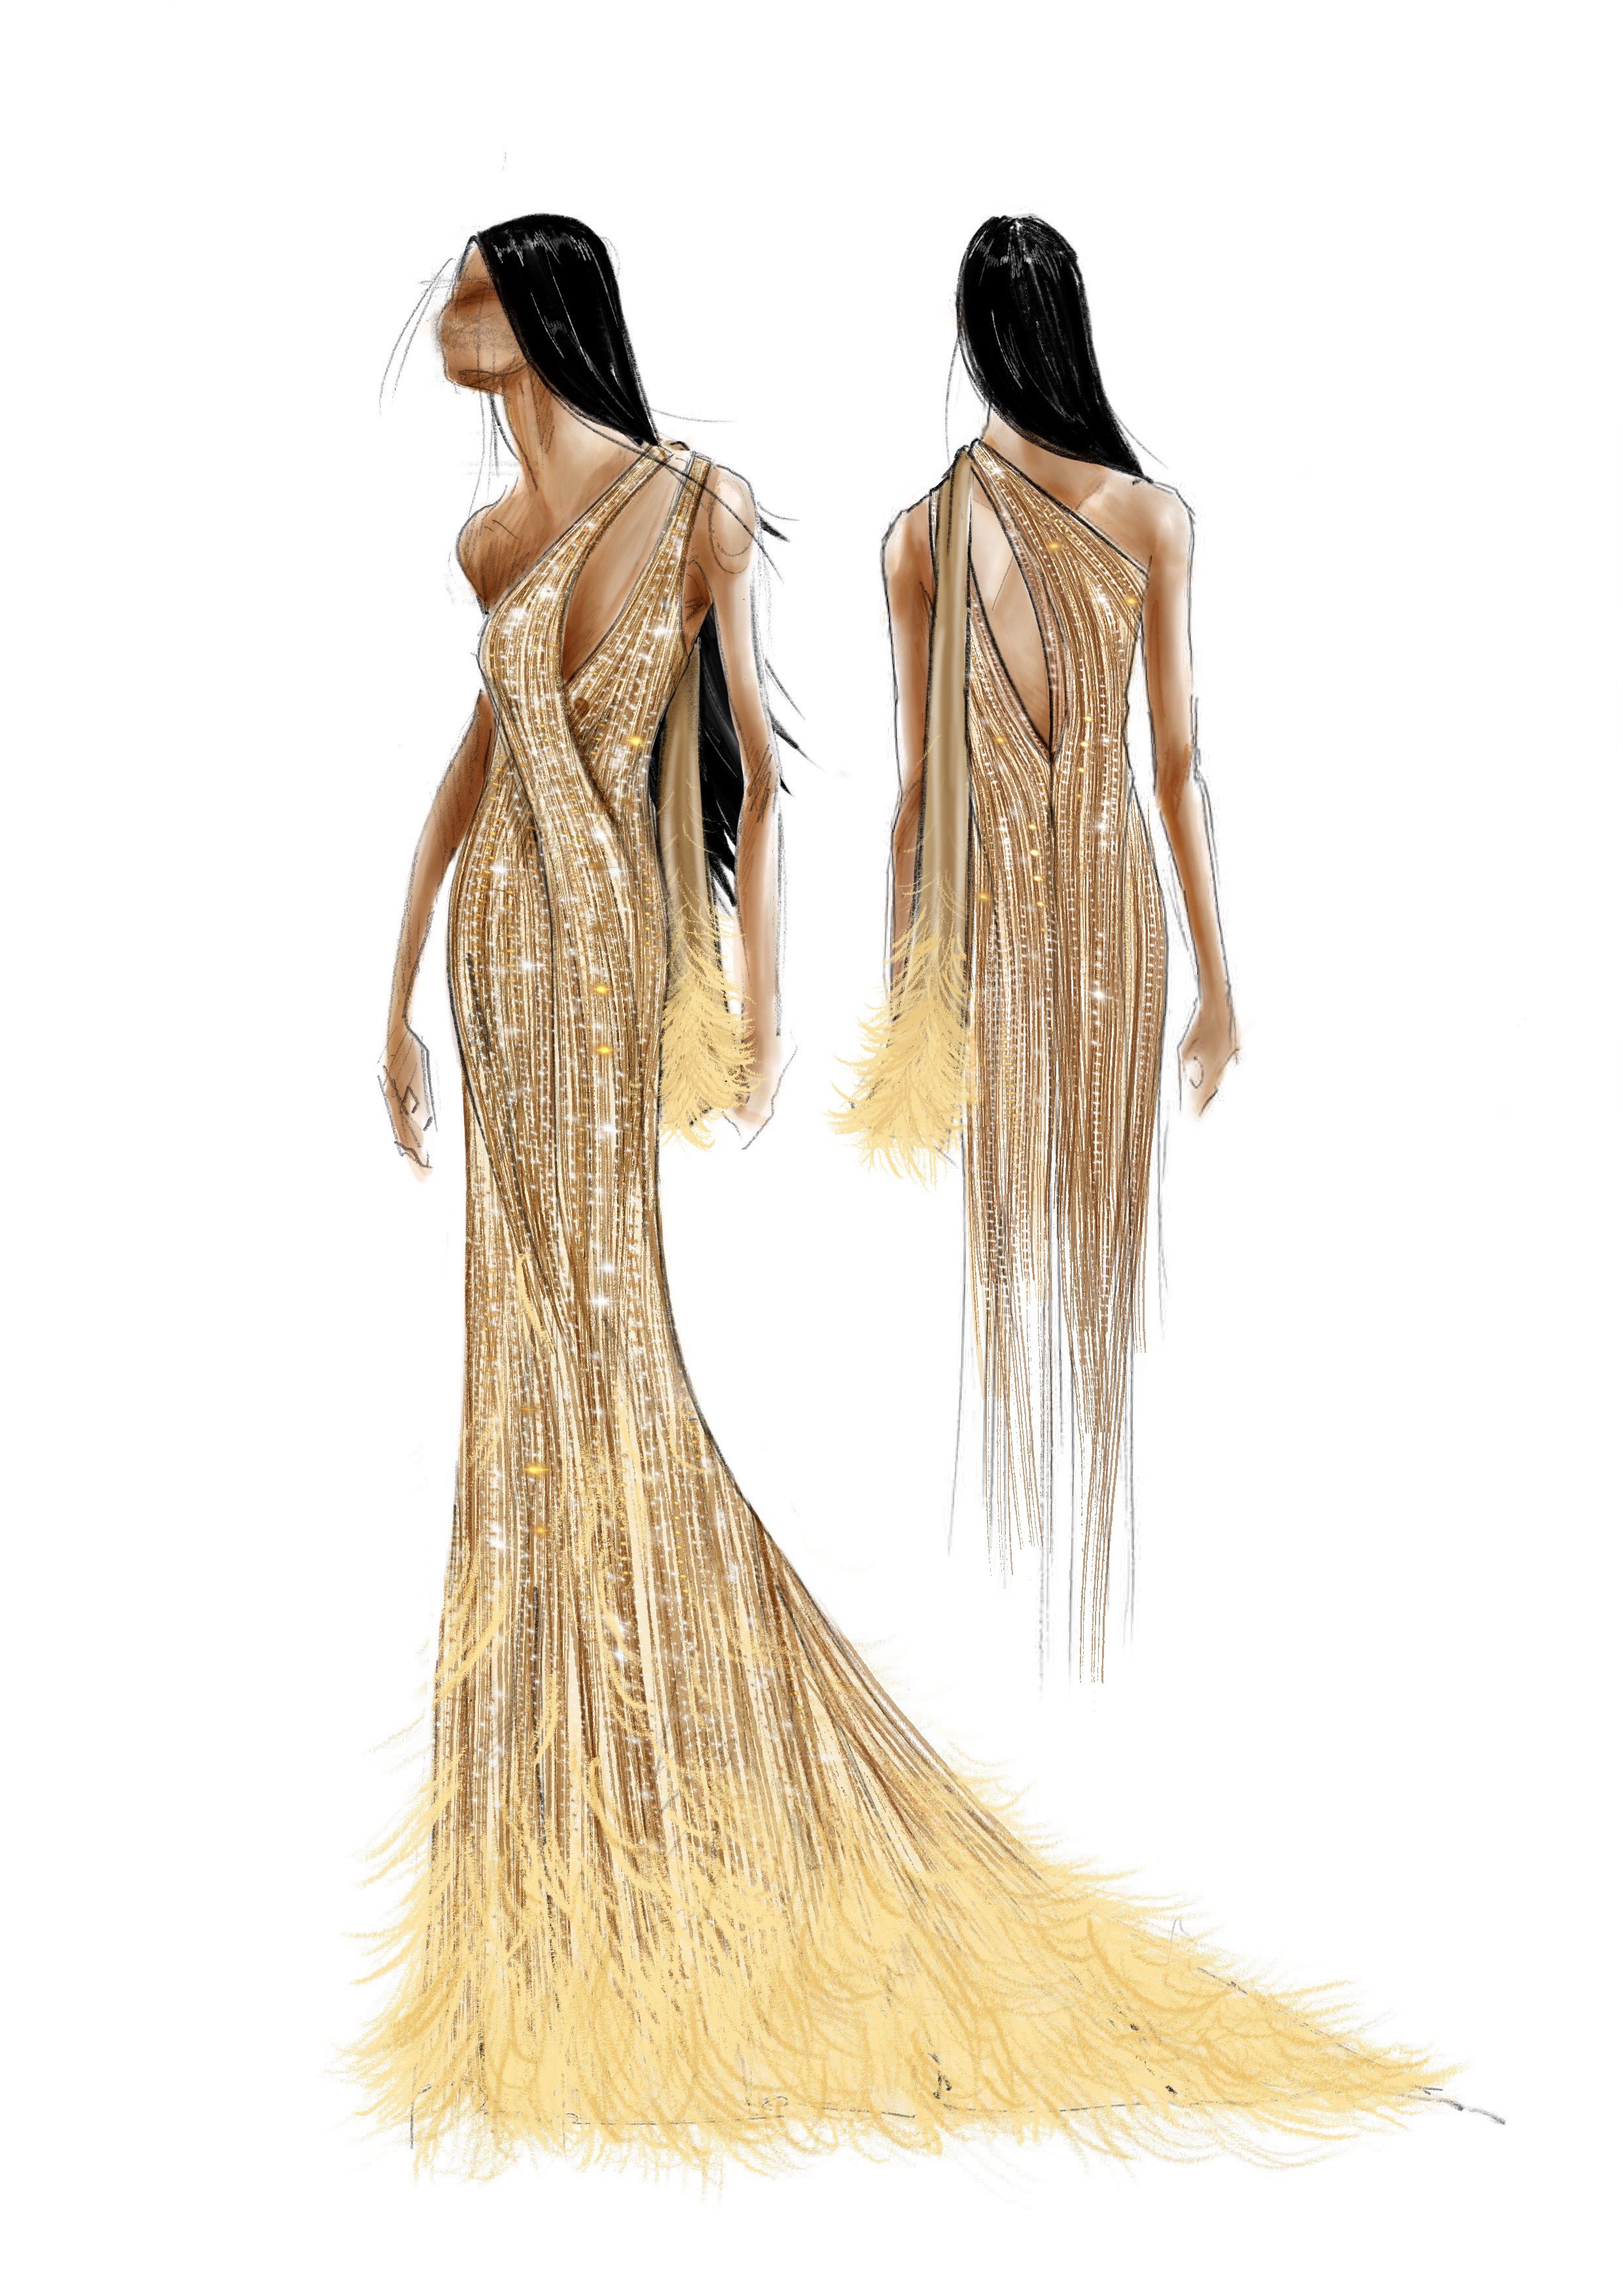 Outfit Sketch - Gold-toned.jpg